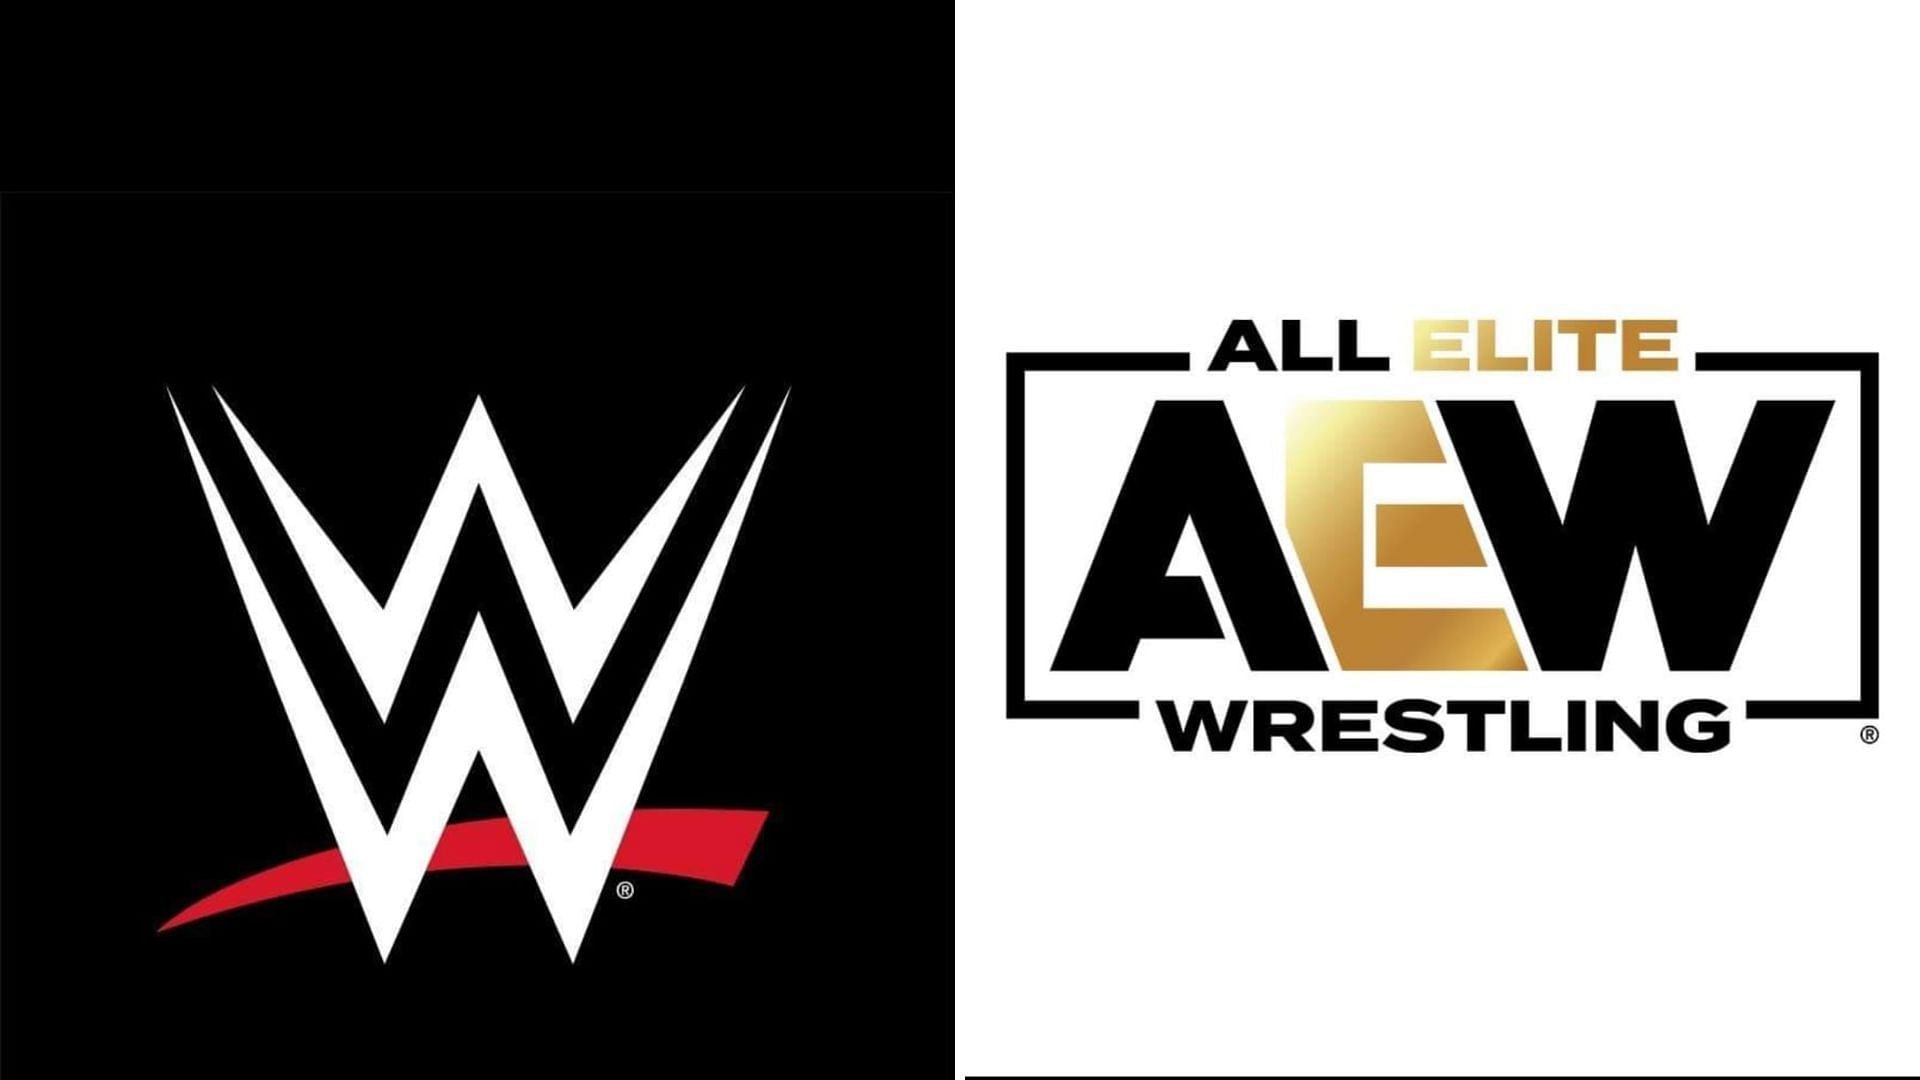 Both AEW and WWE want this big free agent.